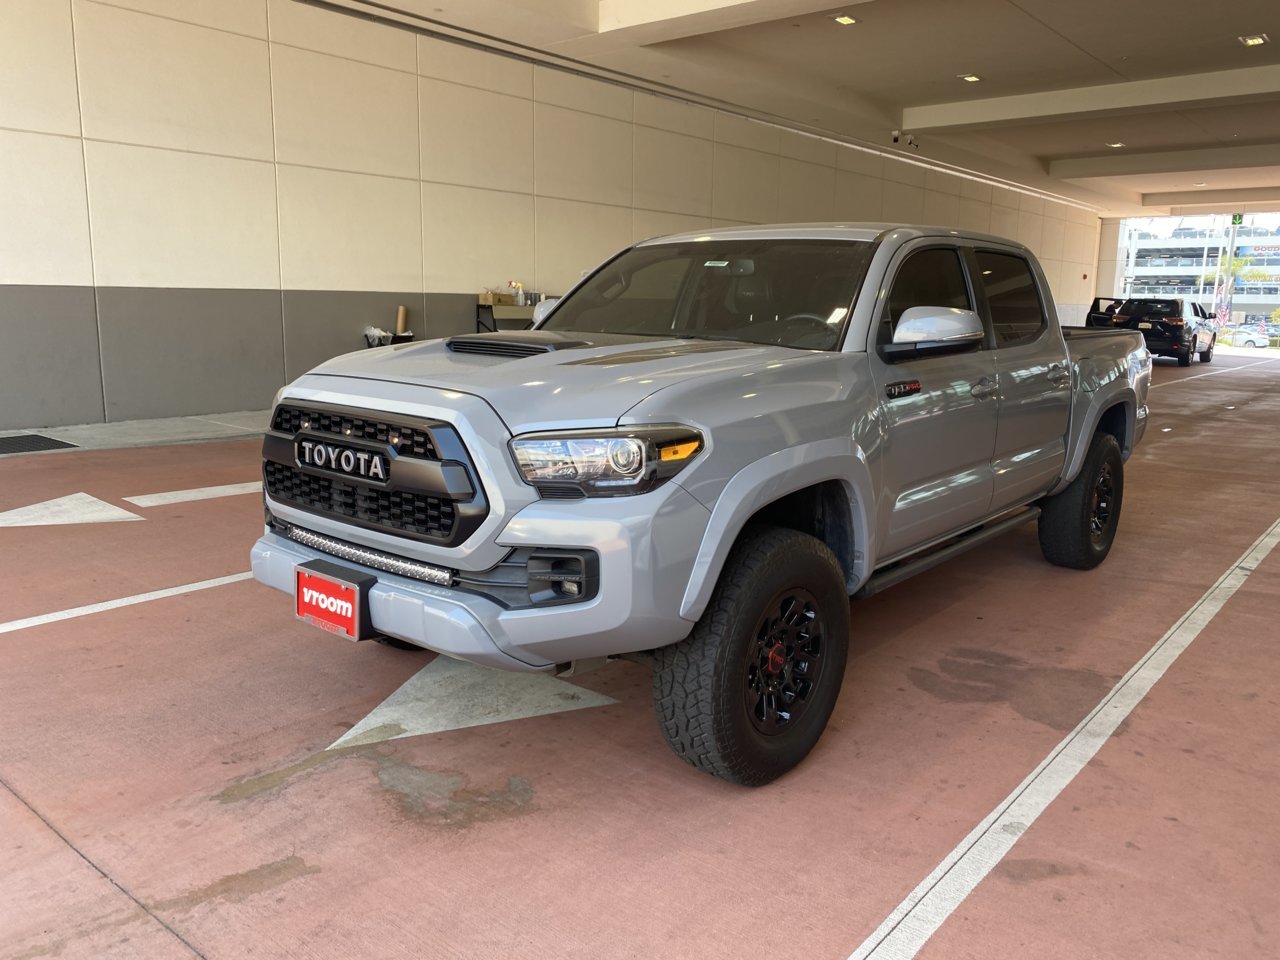 My First Toyota - 17 Tacoma TRD Pro (Cement) | Tacoma World